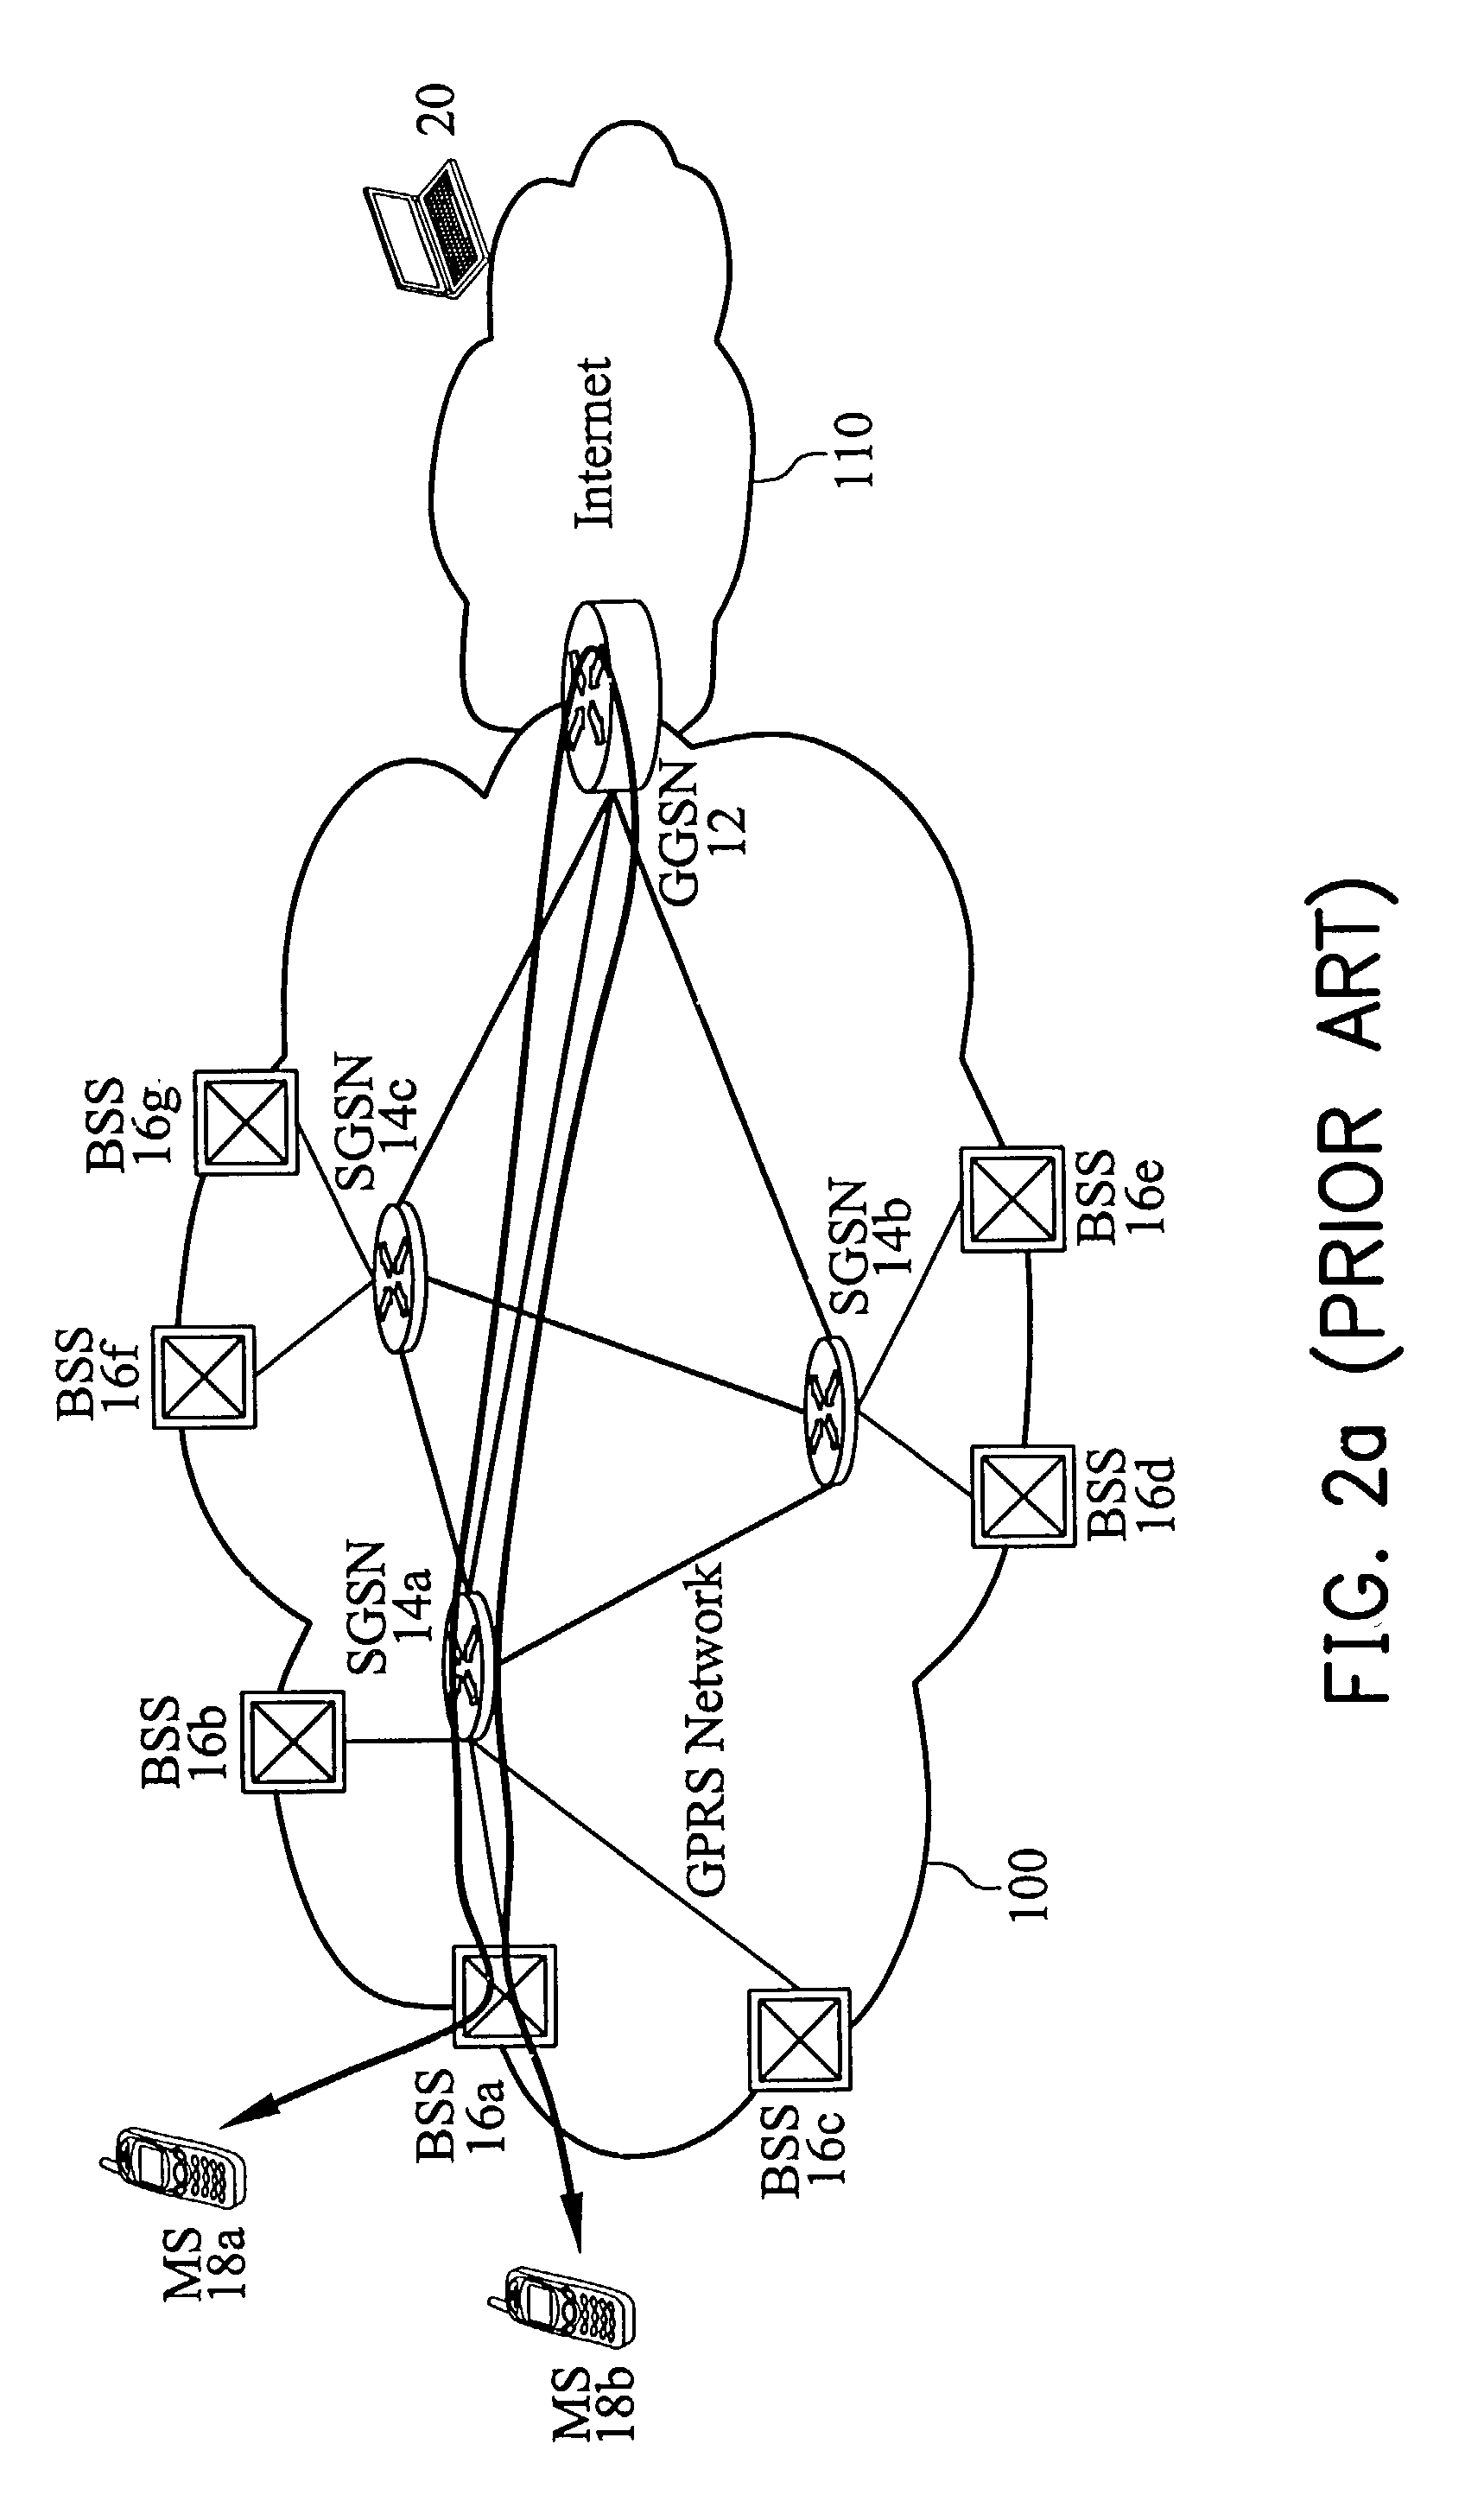 Packet delivery method for packet radio networks